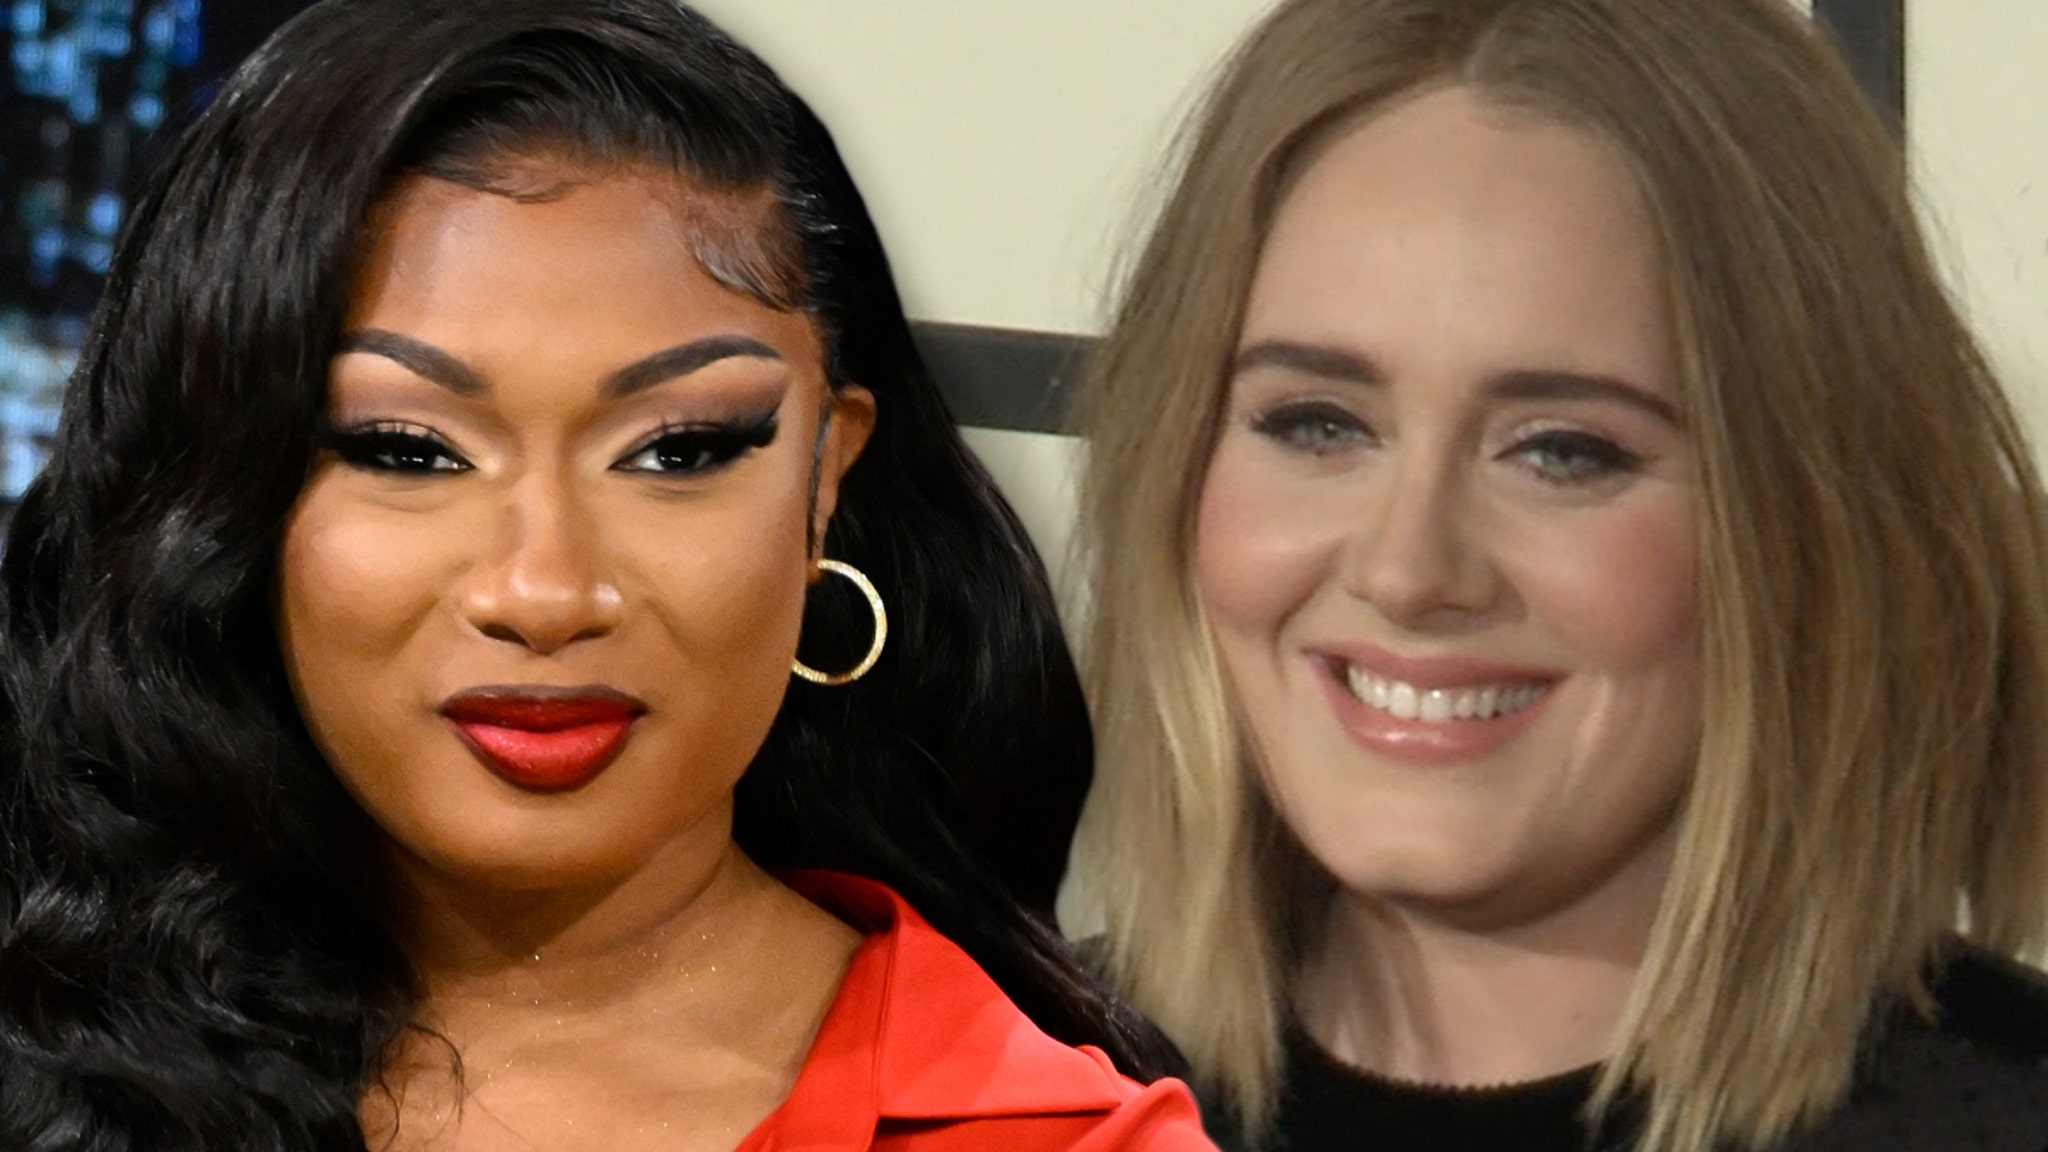 Adele sends support to Megan Thee Stallion after Tory Lanez ruling